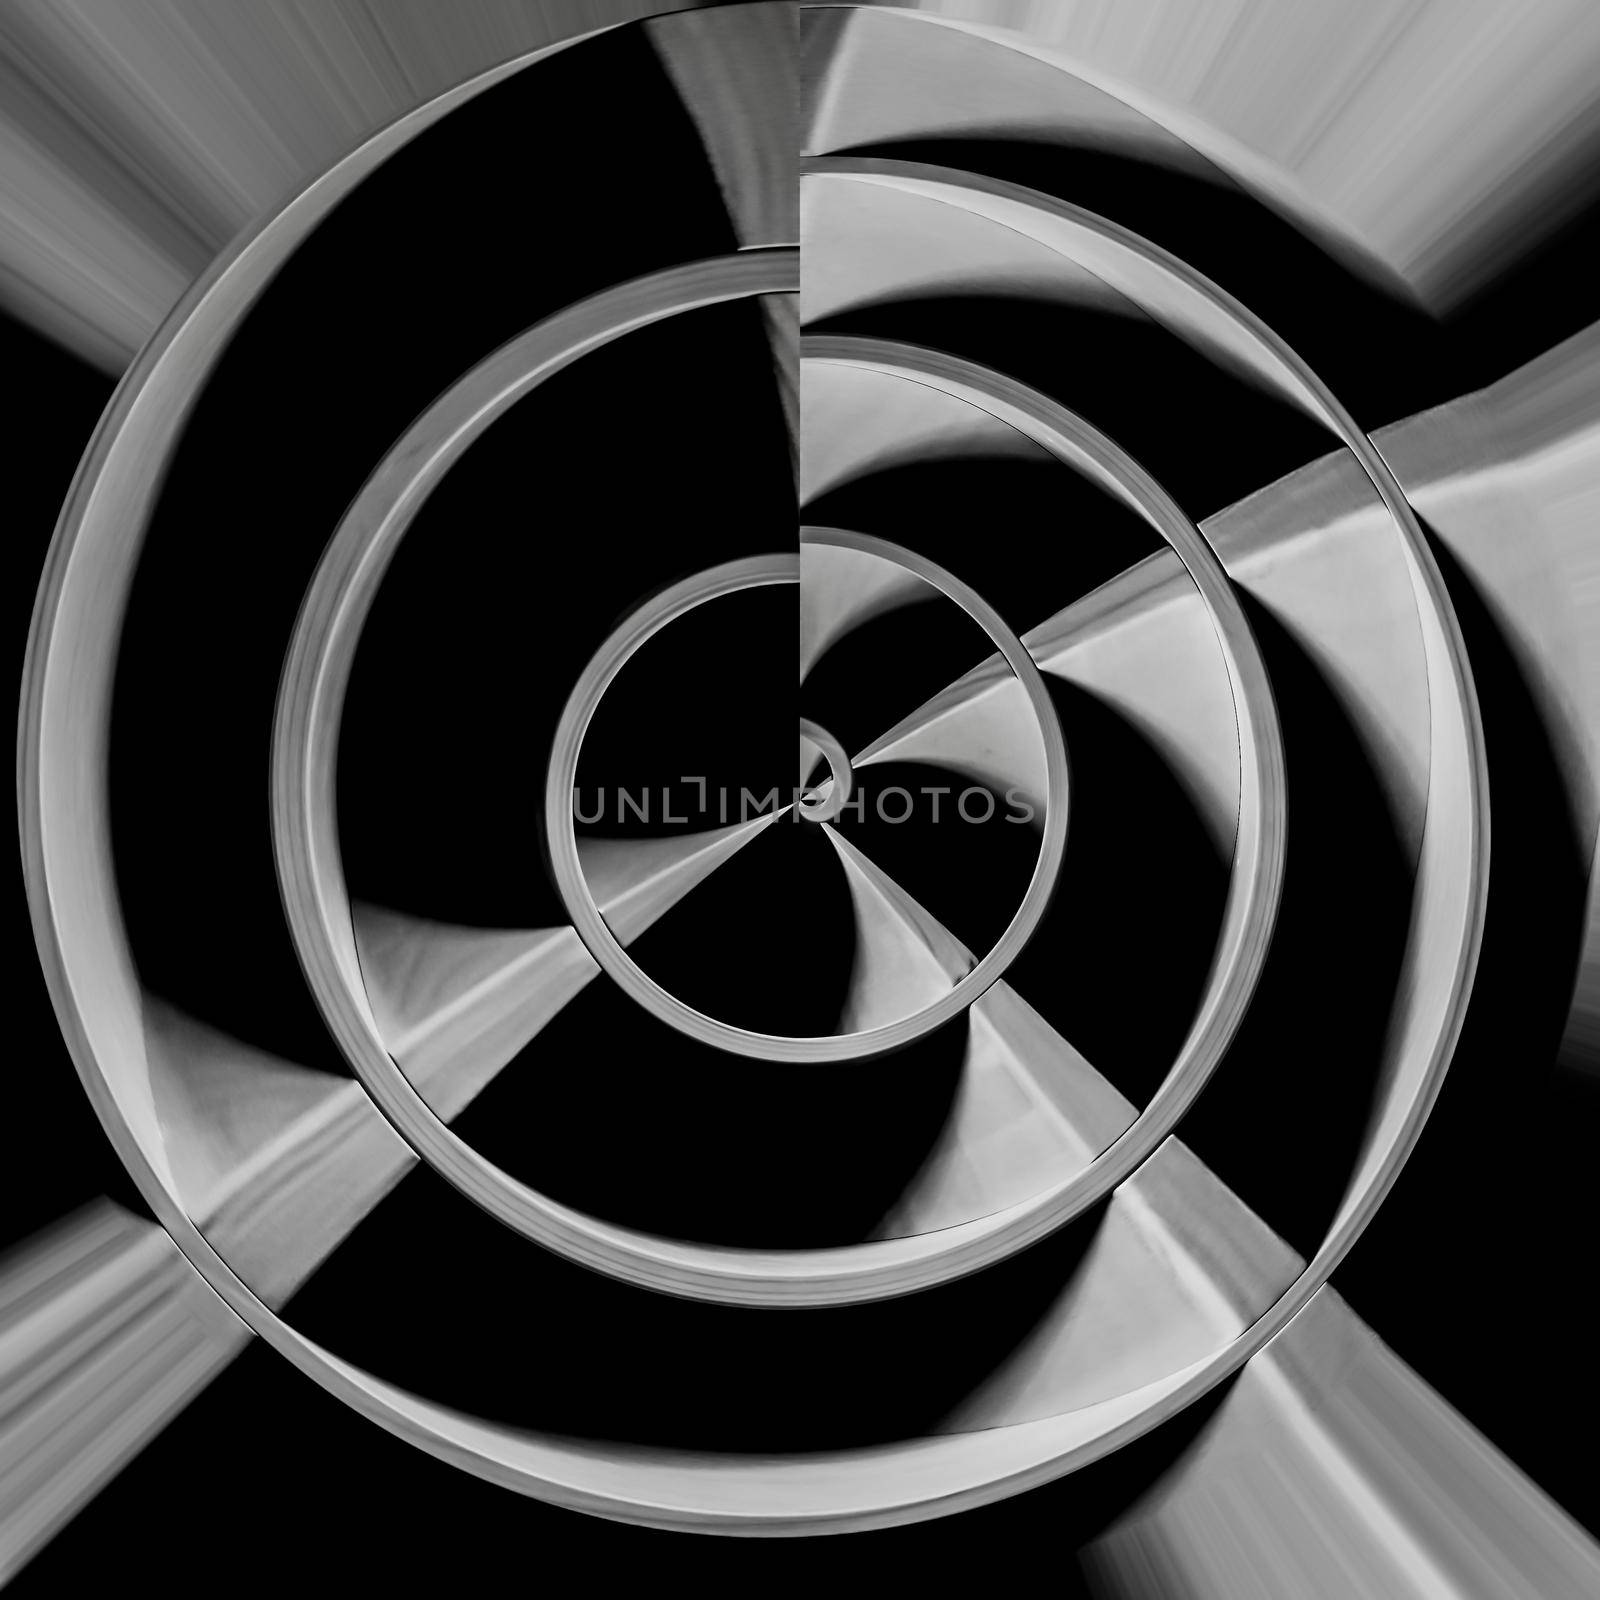 Op art. Abstract rotated lines in the form of a circle. Design element for background, logo, print, sign, symbol and textile pattern by zakob337